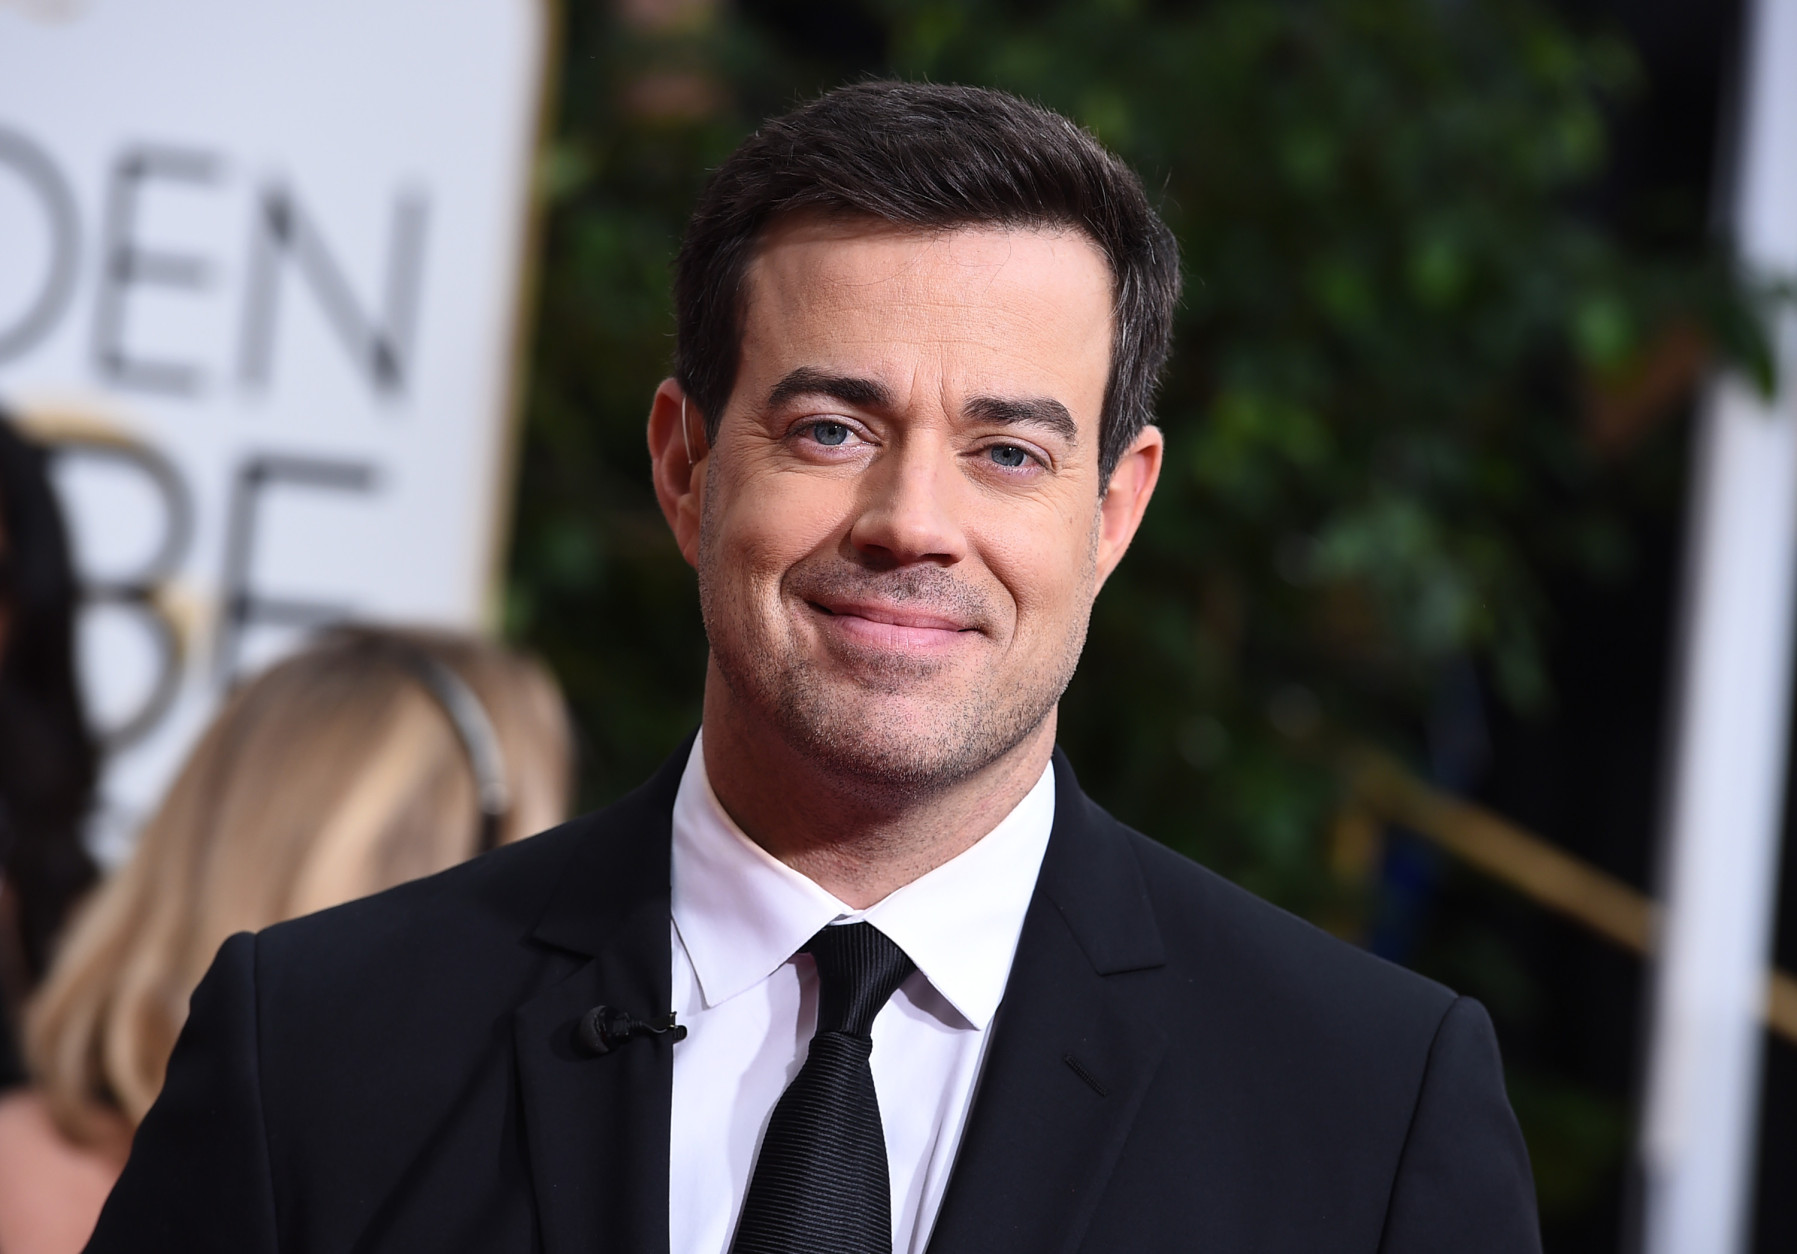 Carson Daly arrives at the 72nd annual Golden Globe Awards at the Beverly Hilton Hotel on Sunday, Jan. 11, 2015, in Beverly Hills, Calif. (Photo by Jordan Strauss/Invision/AP)